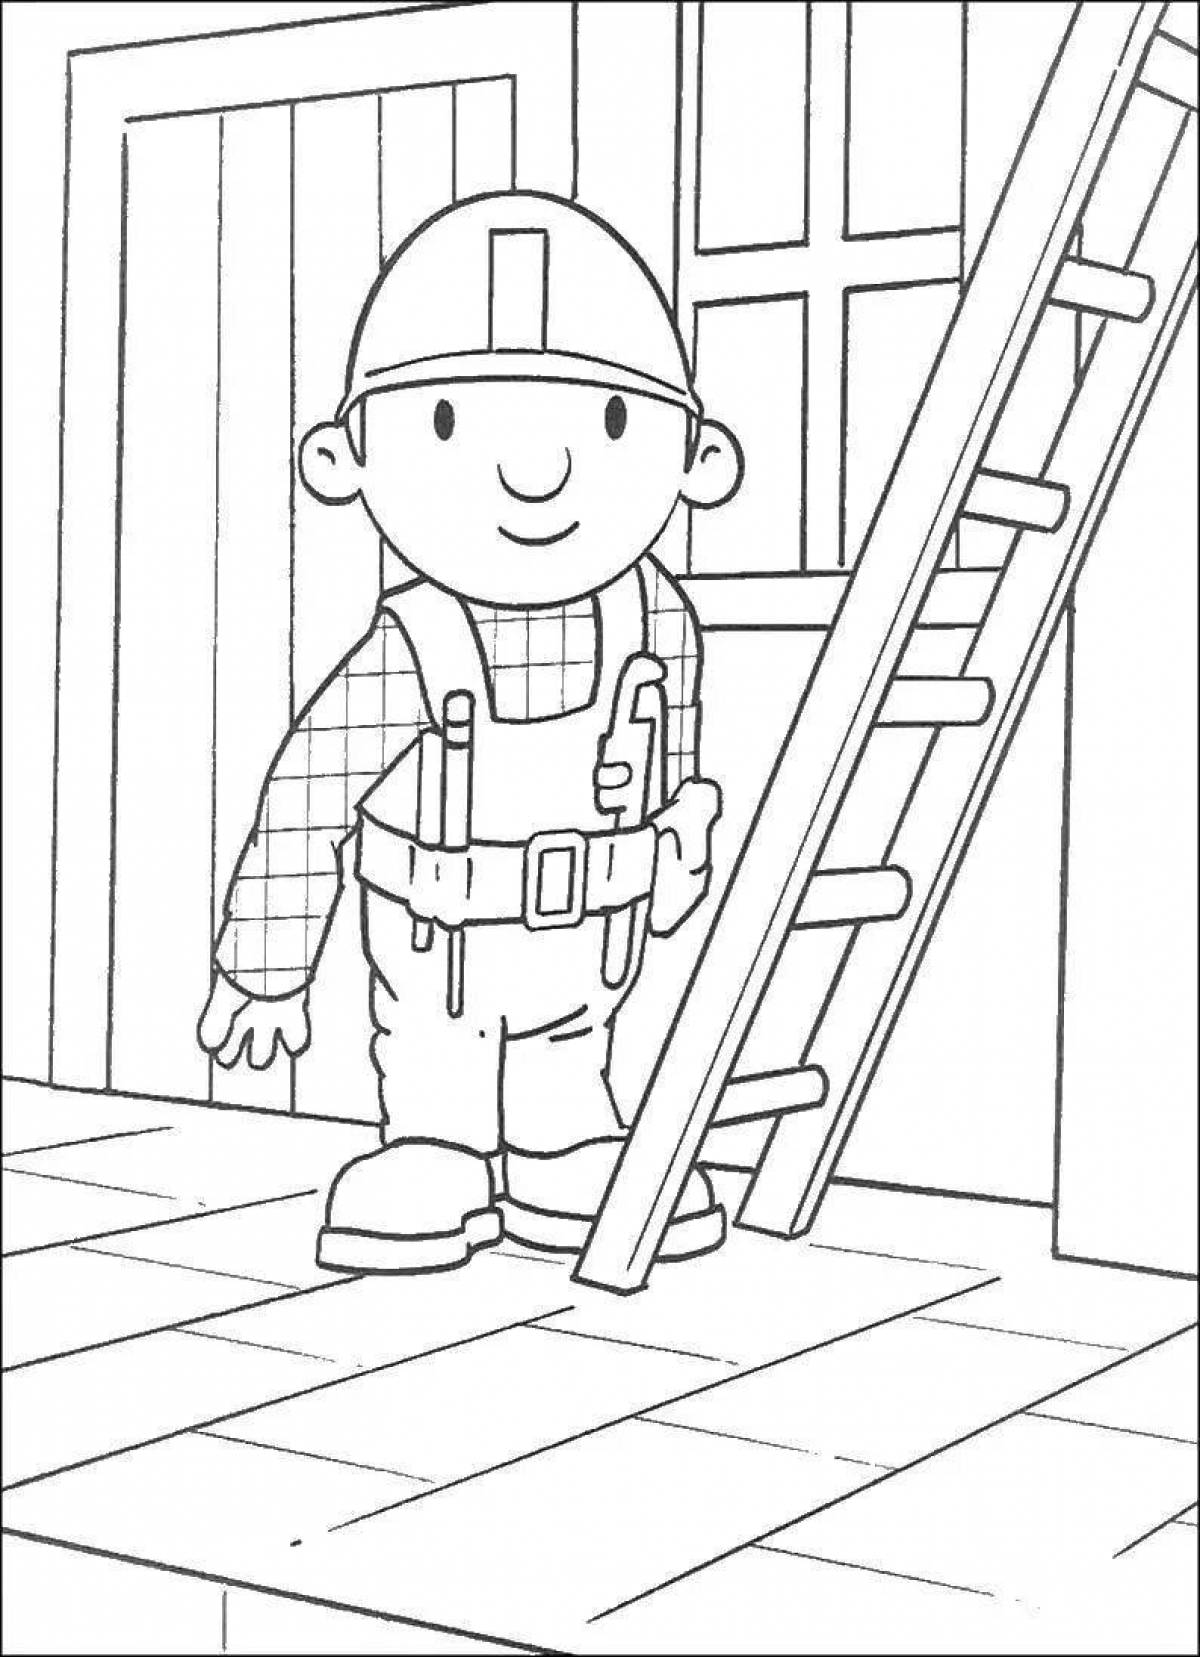 Happy safety coloring book